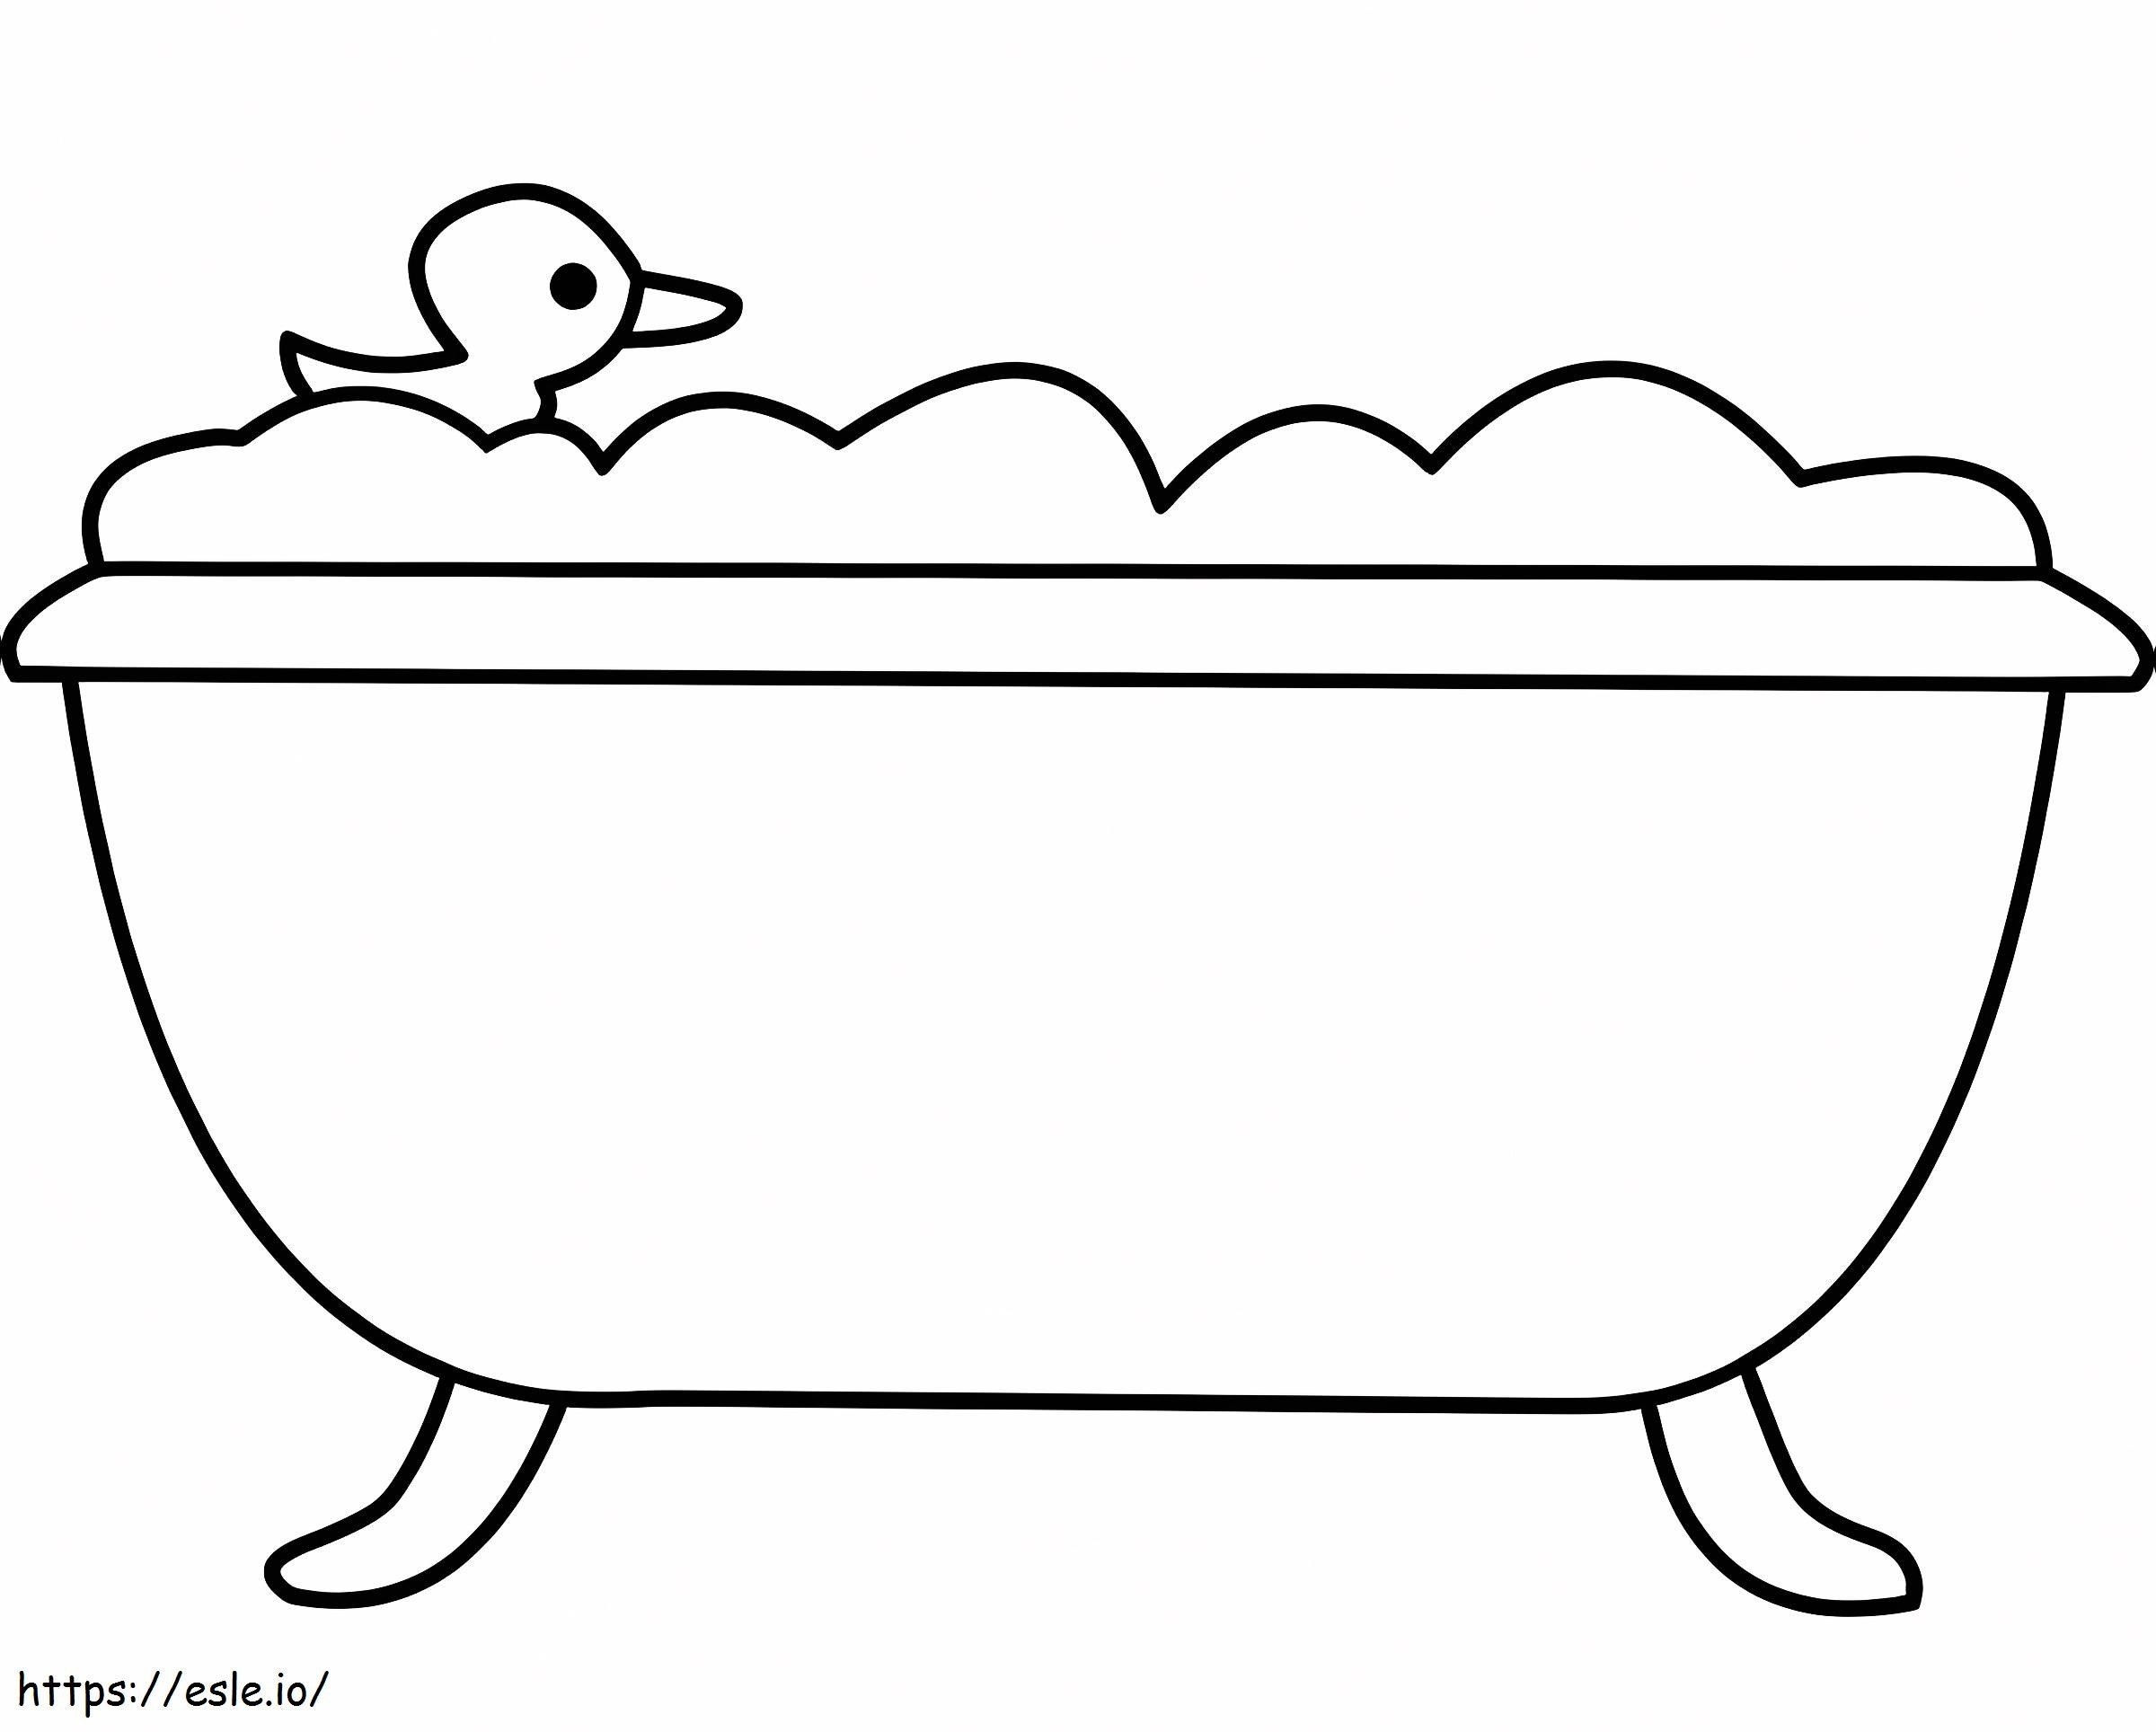 Rubber Duck In The Tub coloring page